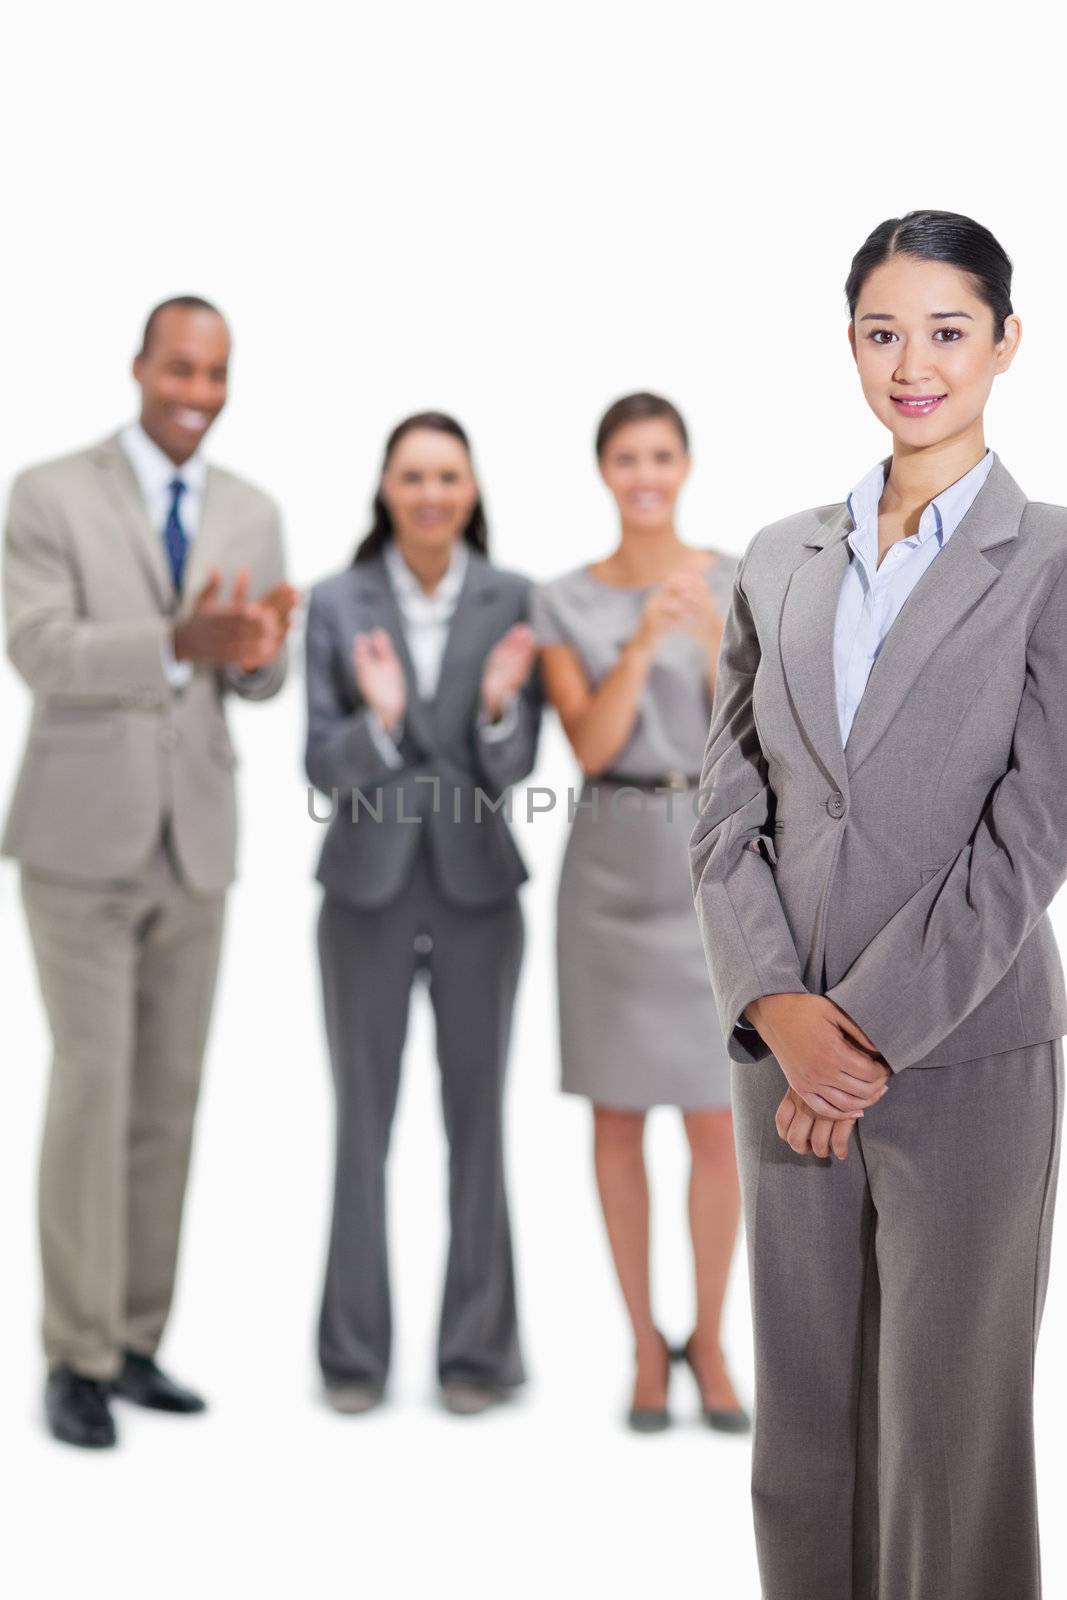 Close-up of a businesswoman smiling with co-workers applauding and looking at her in the background